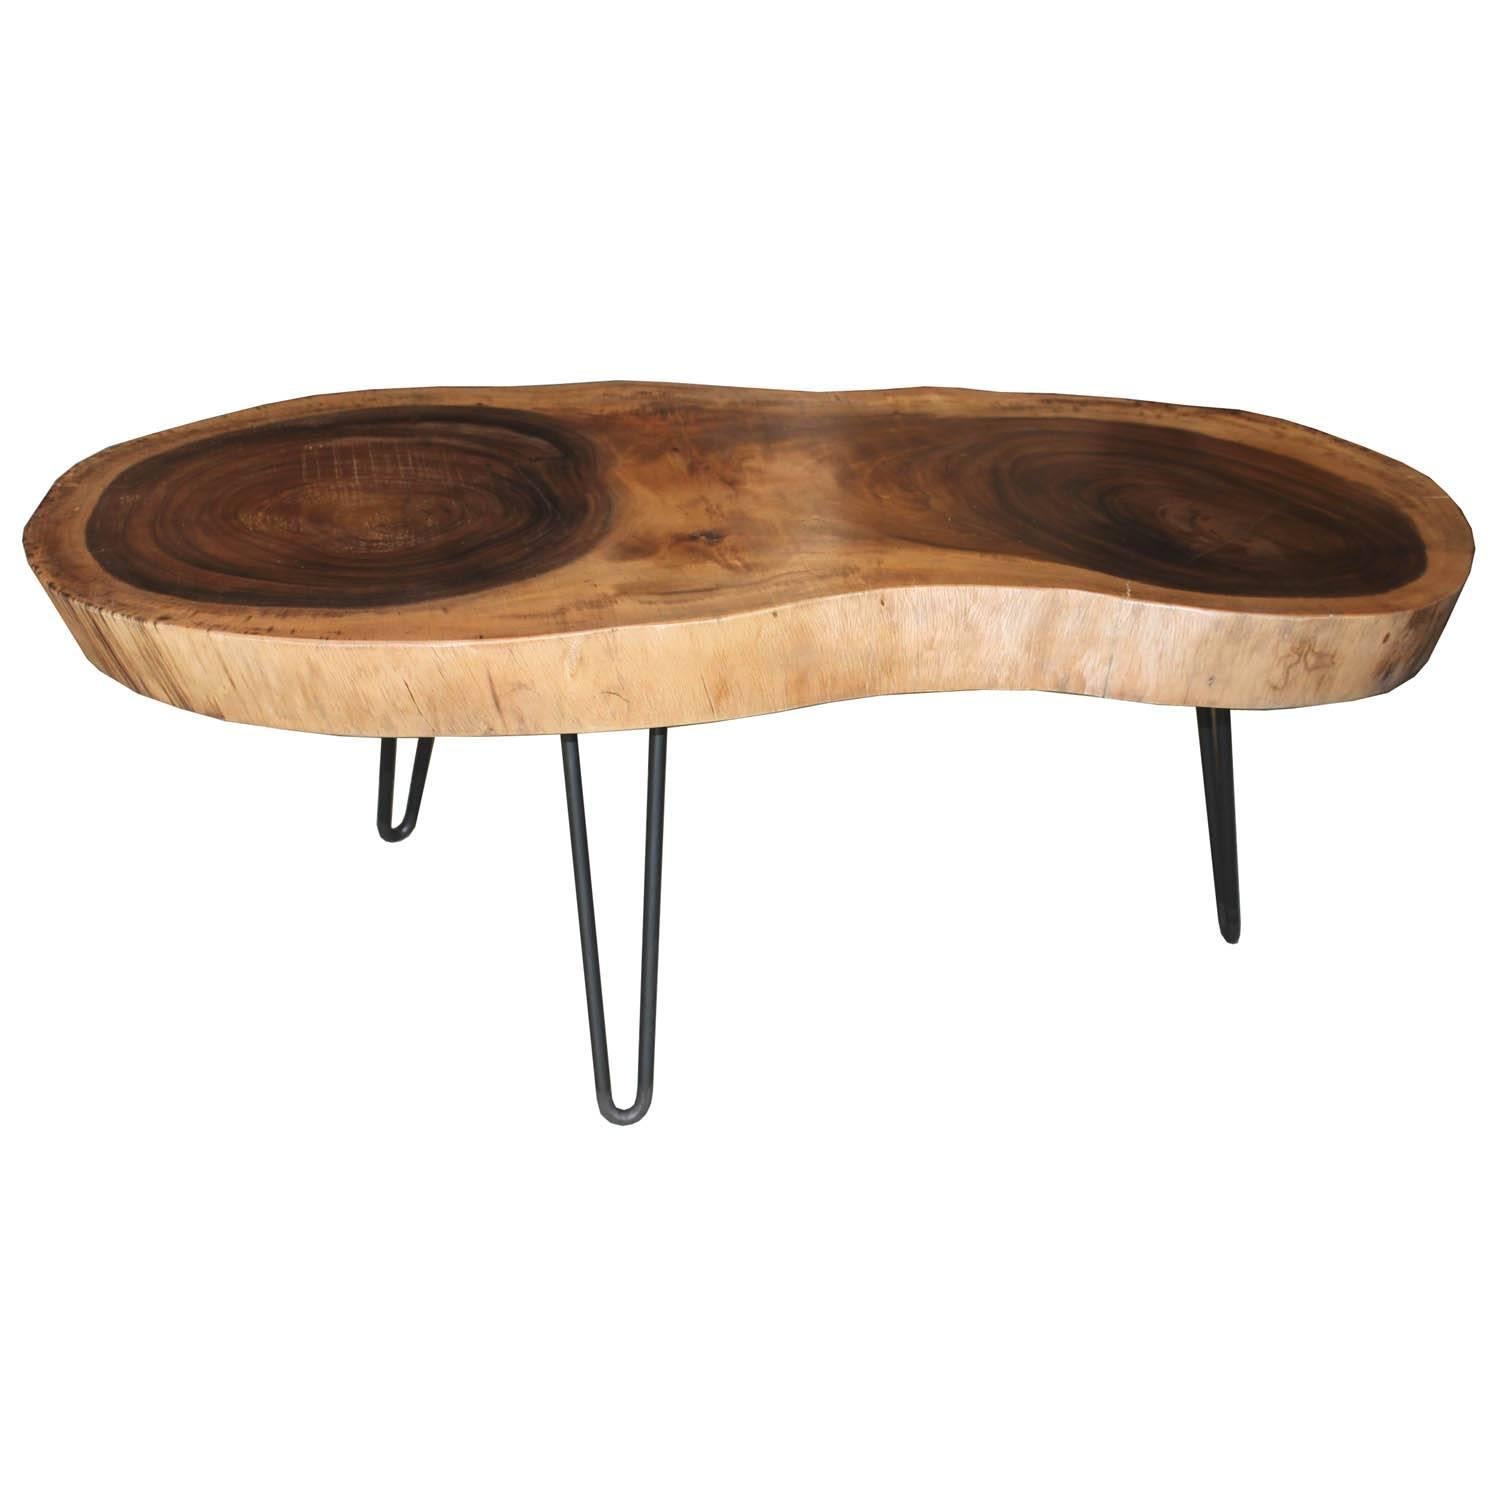 Javanese suar wood coffee table with metal pin legs. Depth of table ranges from 19-22